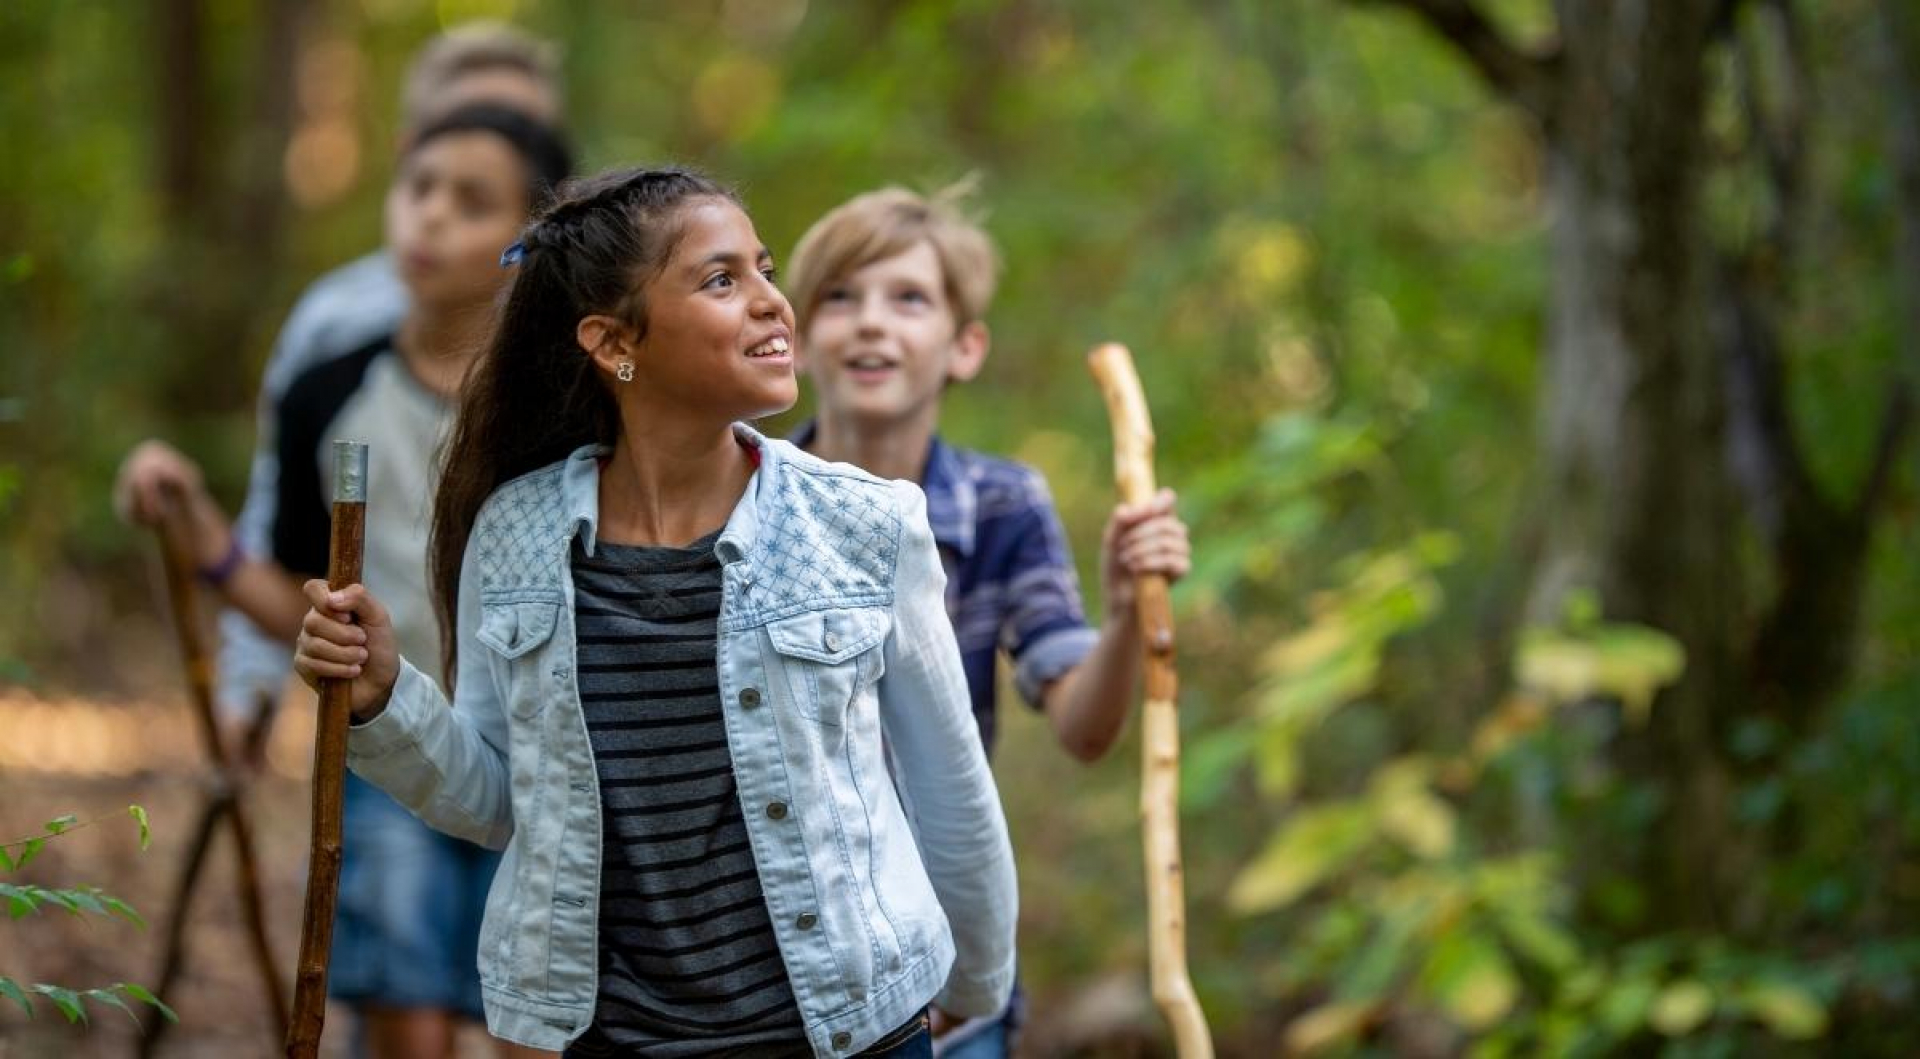 Middle Schoolers Need Nature